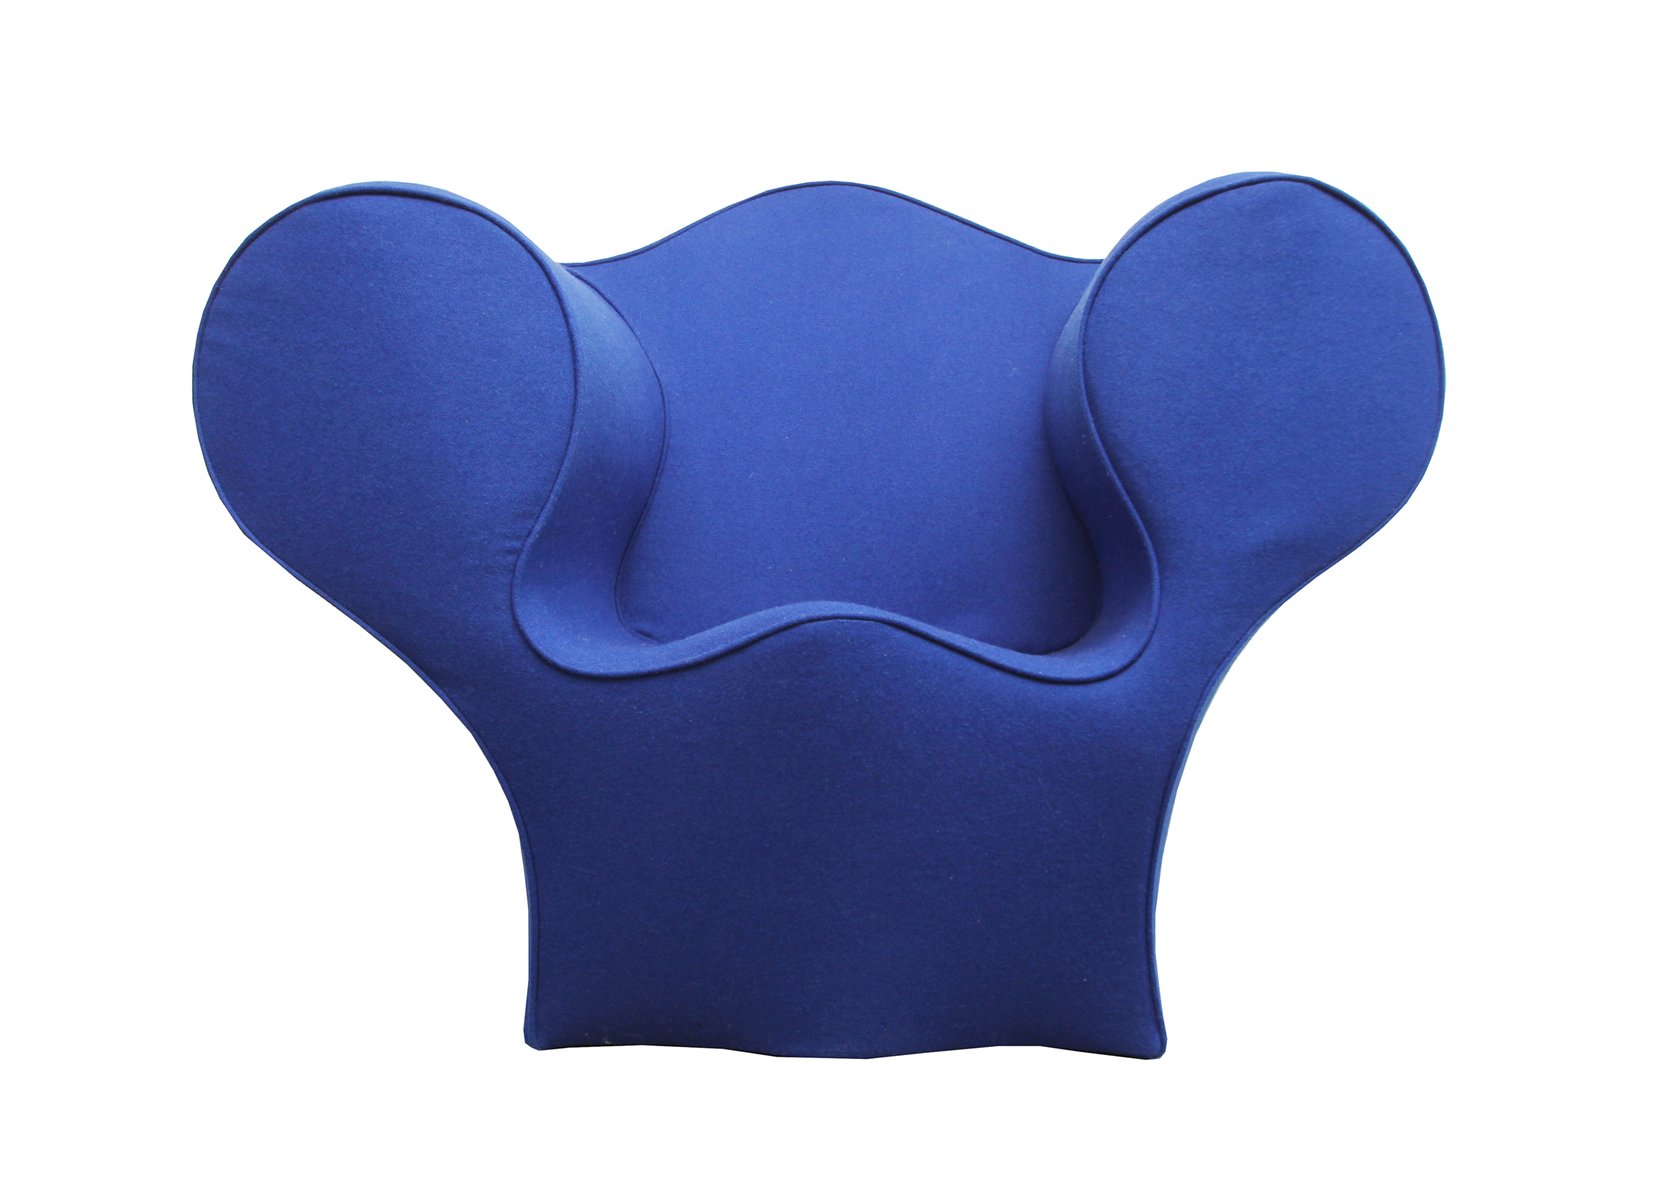 childrens chair by ron arad for moroso 1989 PF-515602